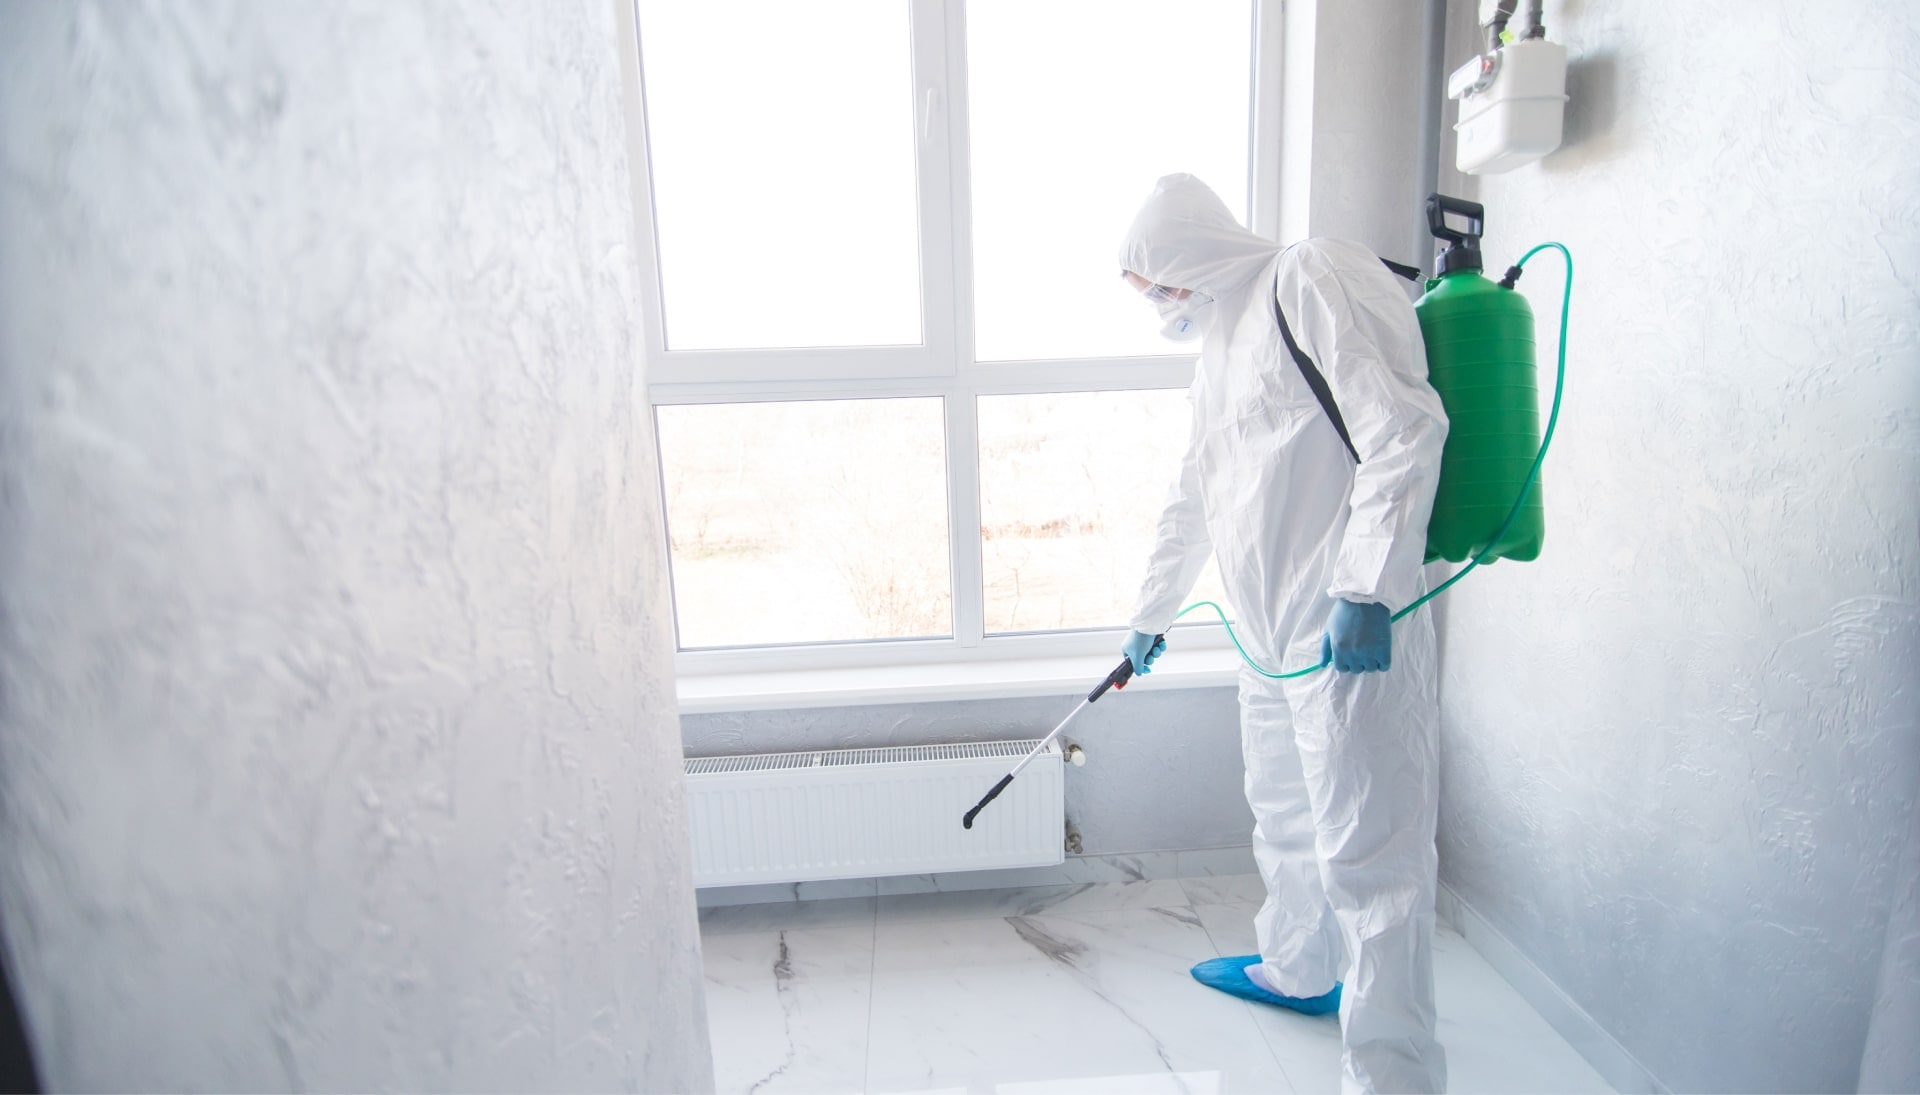 We provide the highest-quality mold inspection, testing, and removal services in the Long Beach, California area.